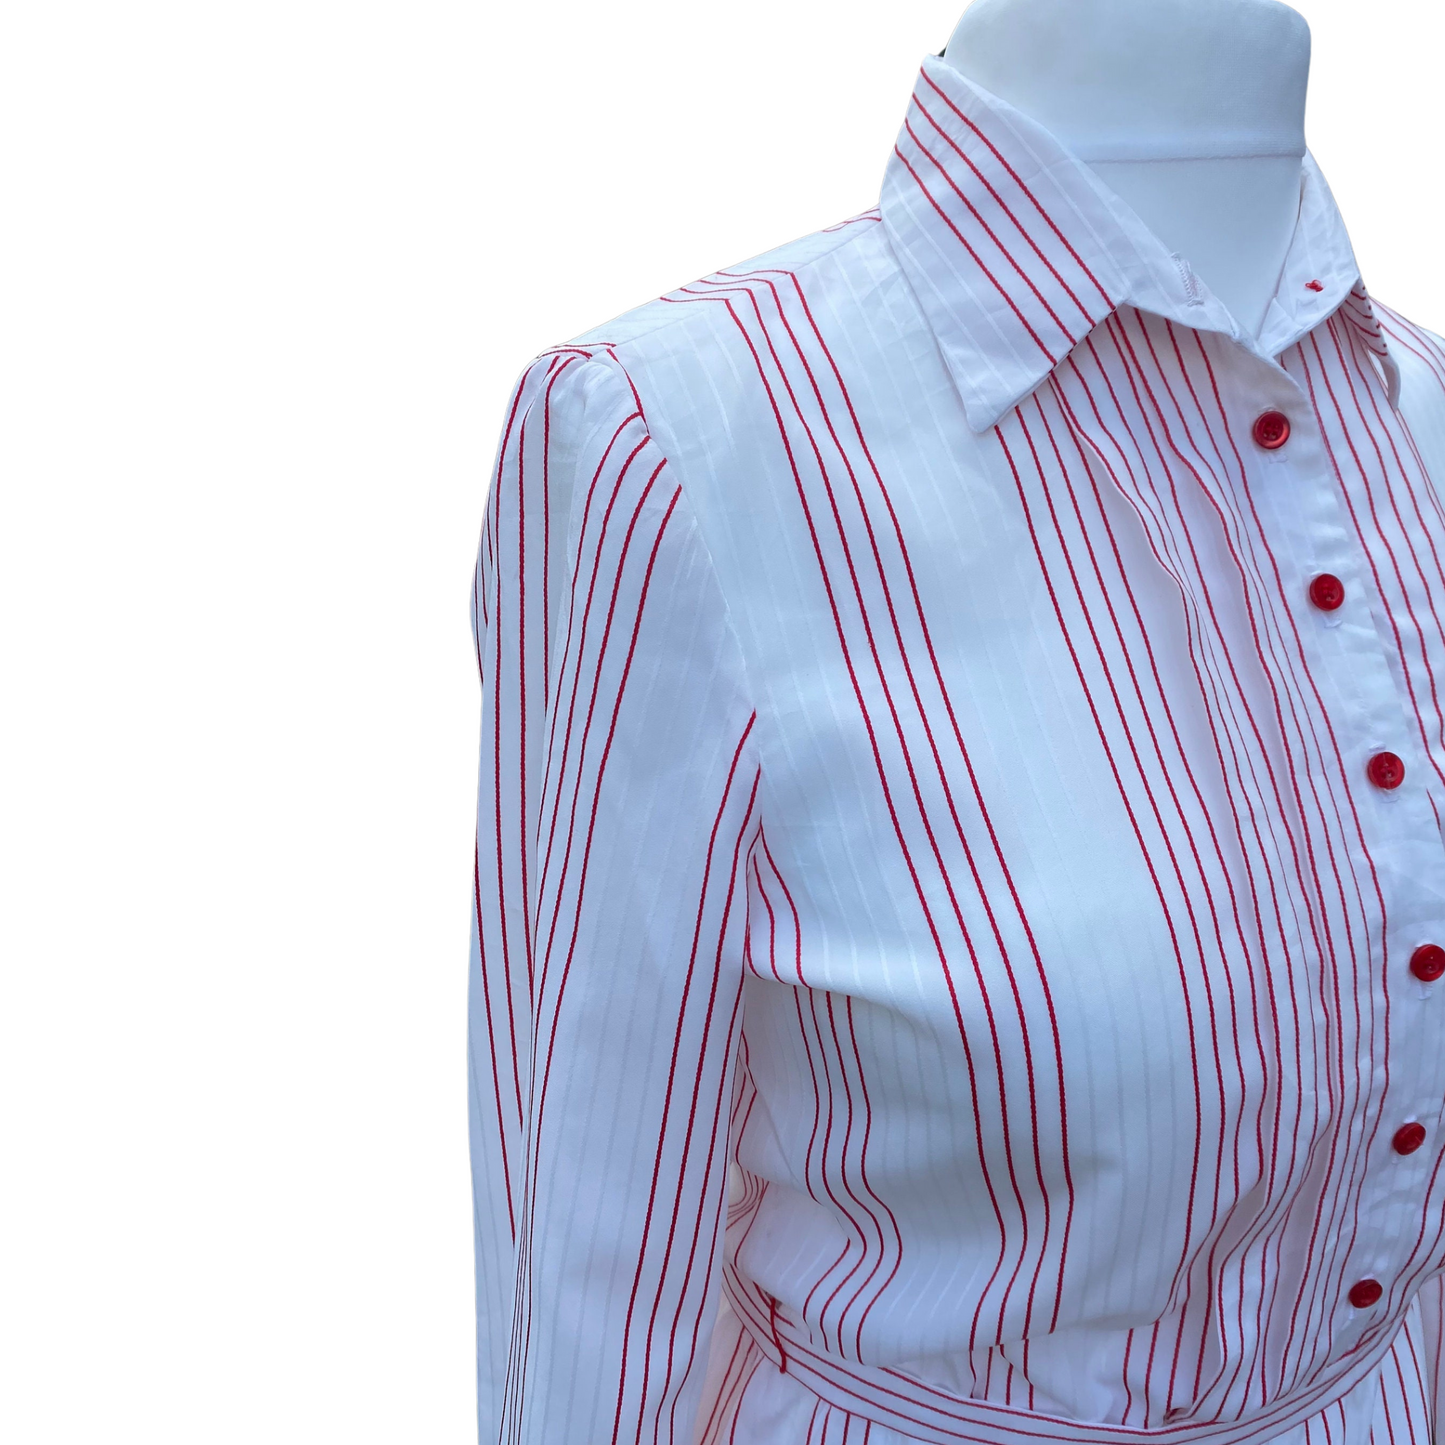 70s /80s white and red striped dress with matching belt  by Kay Windsor. Approx UK size 14-16